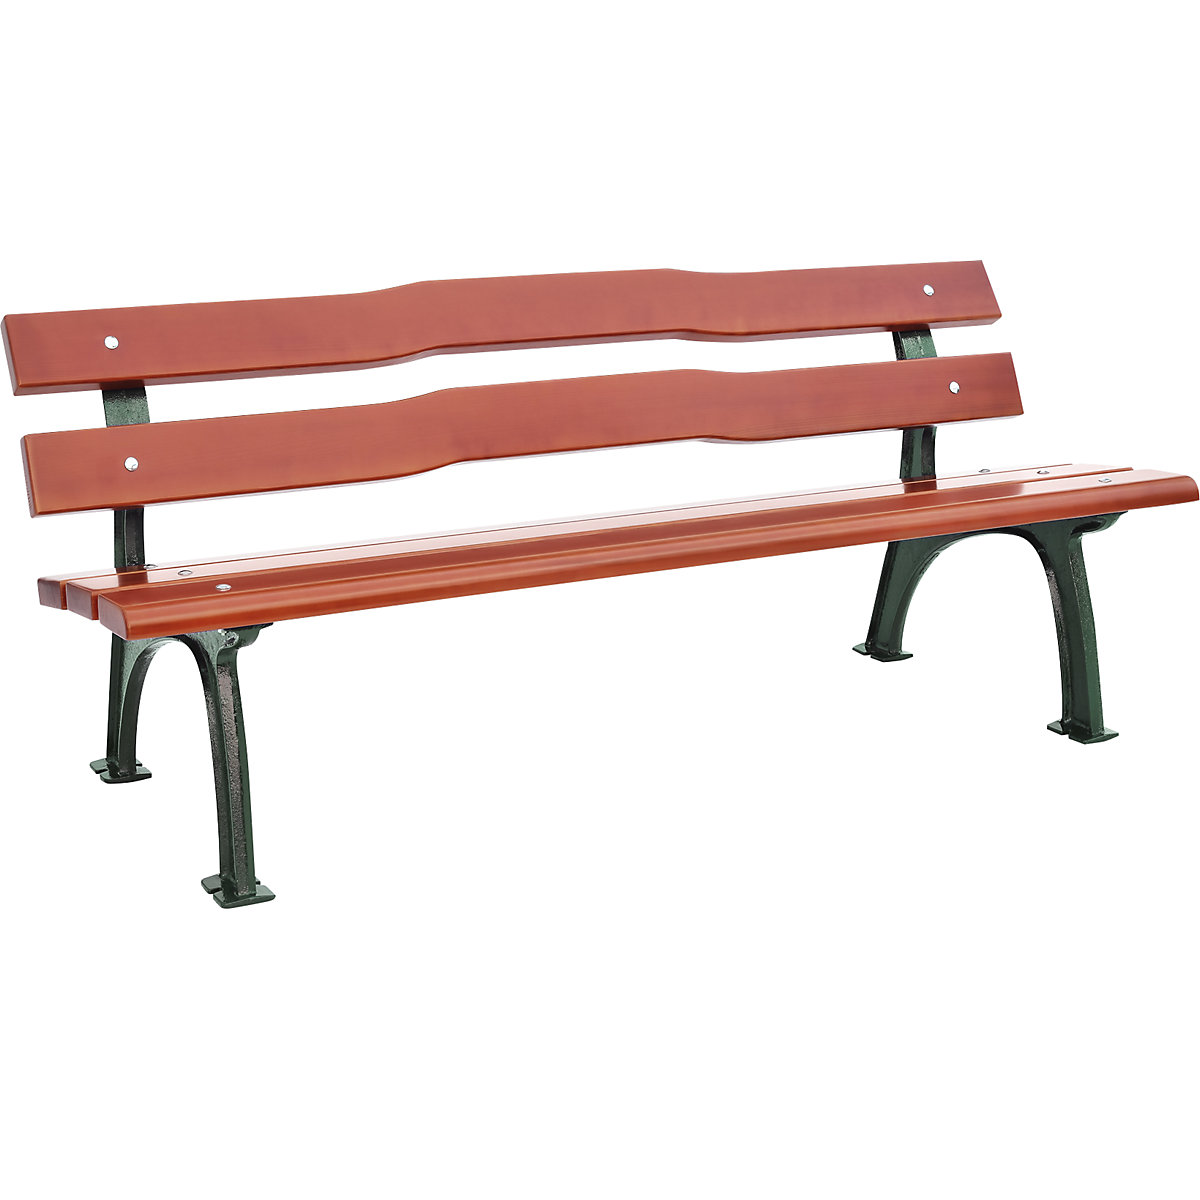 Park bench, solid cast iron frame, seat and back rest made of pine wood, curved